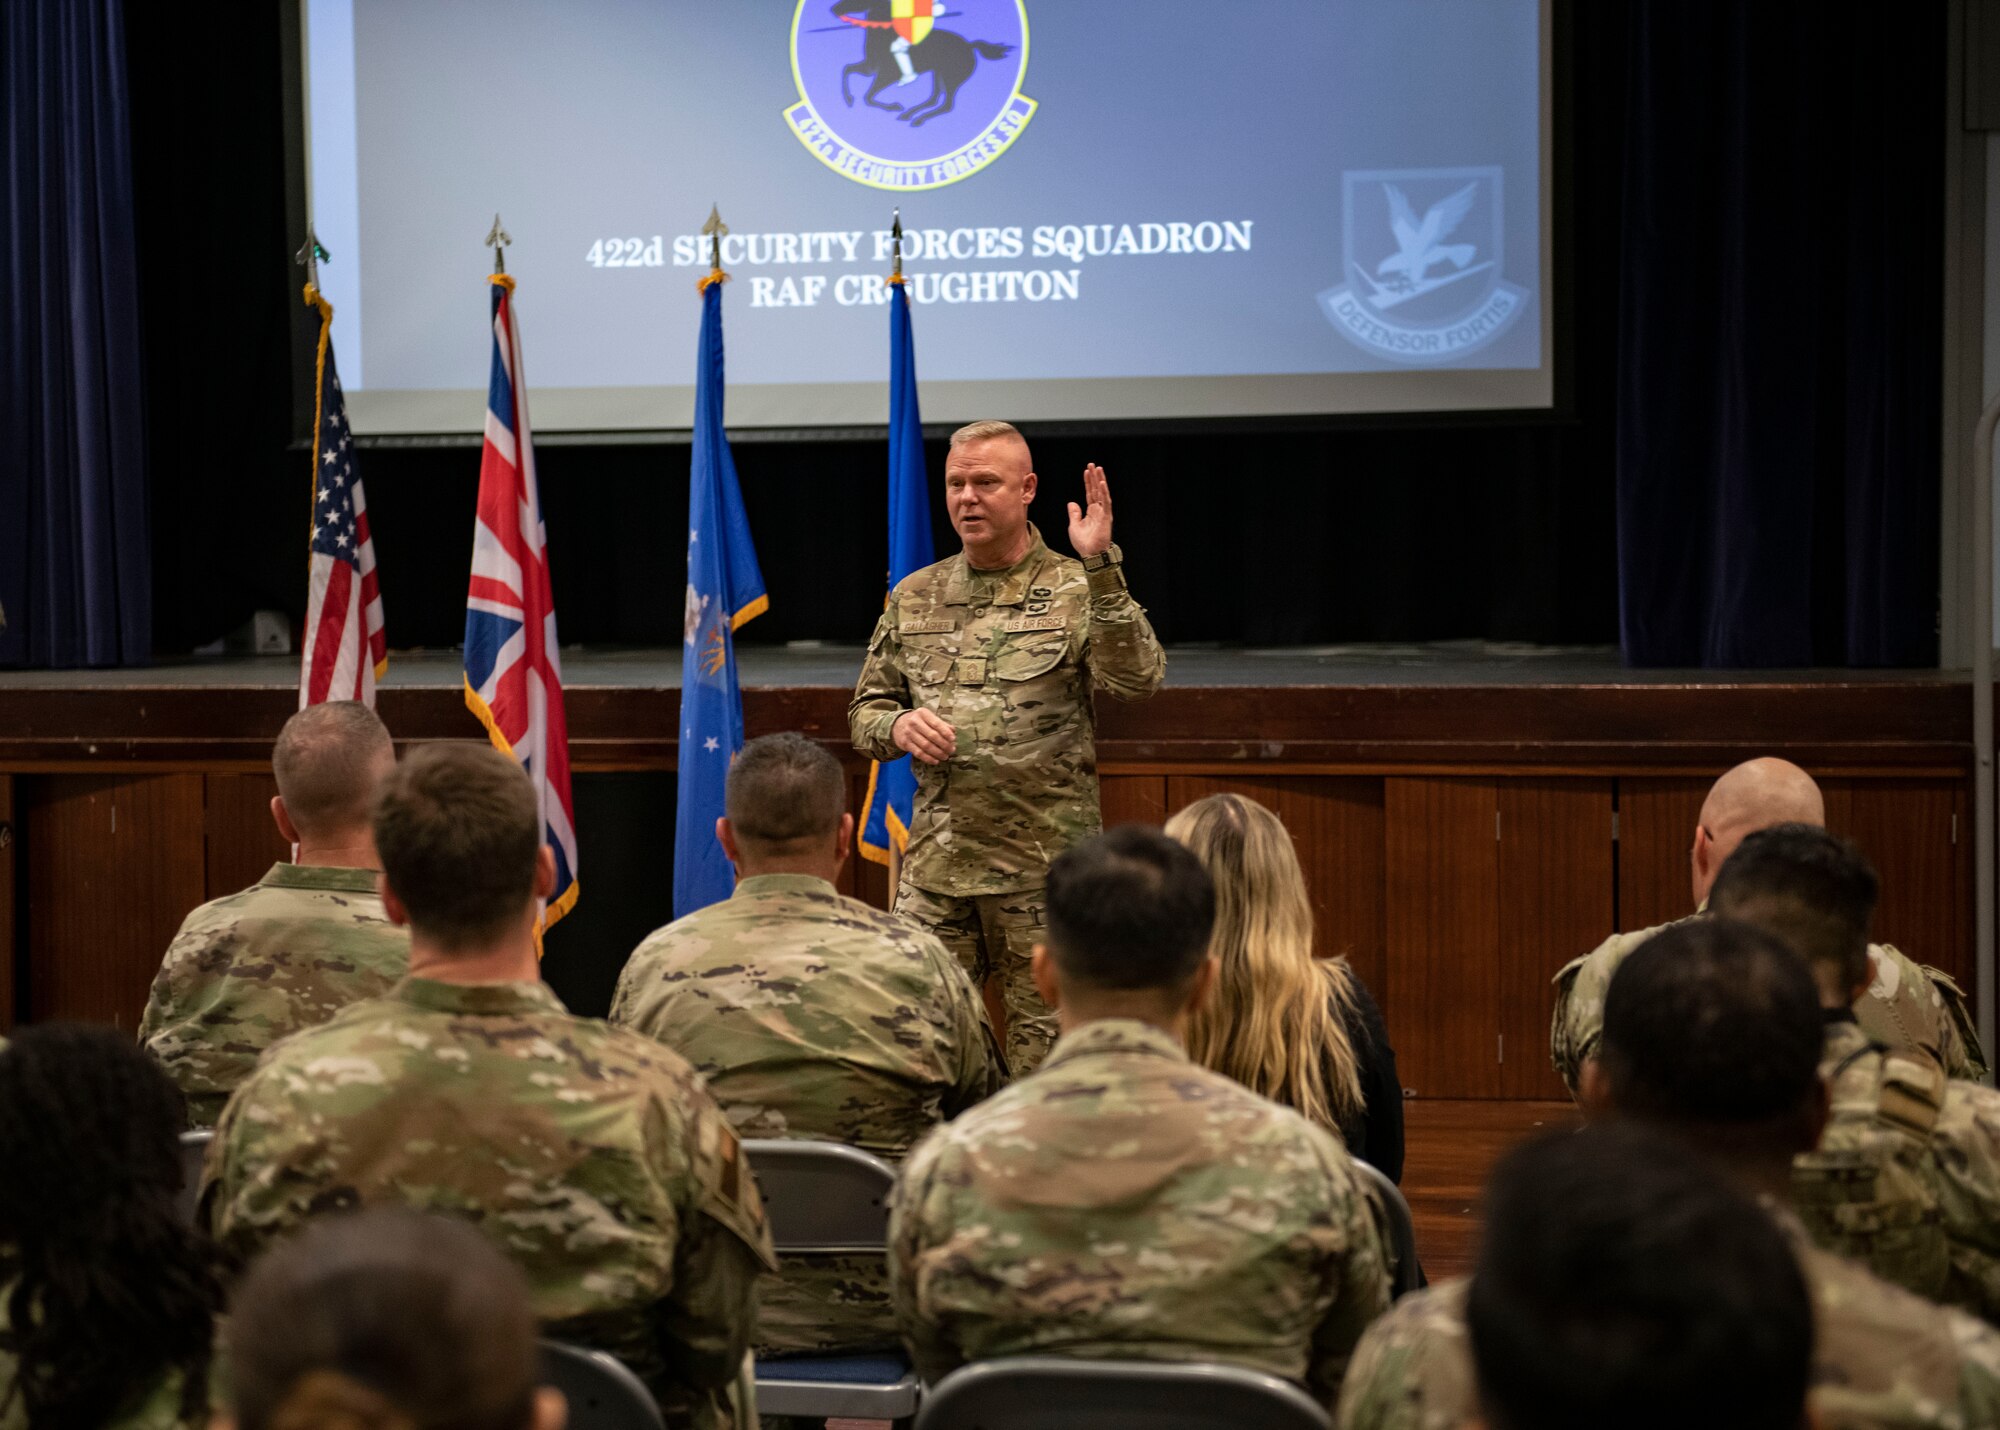 Chief Master Sgt. Donald Gallagher, United States Air Force security forces career field manager, speaks to the 422d Security Forces Squadron at RAF Croughton